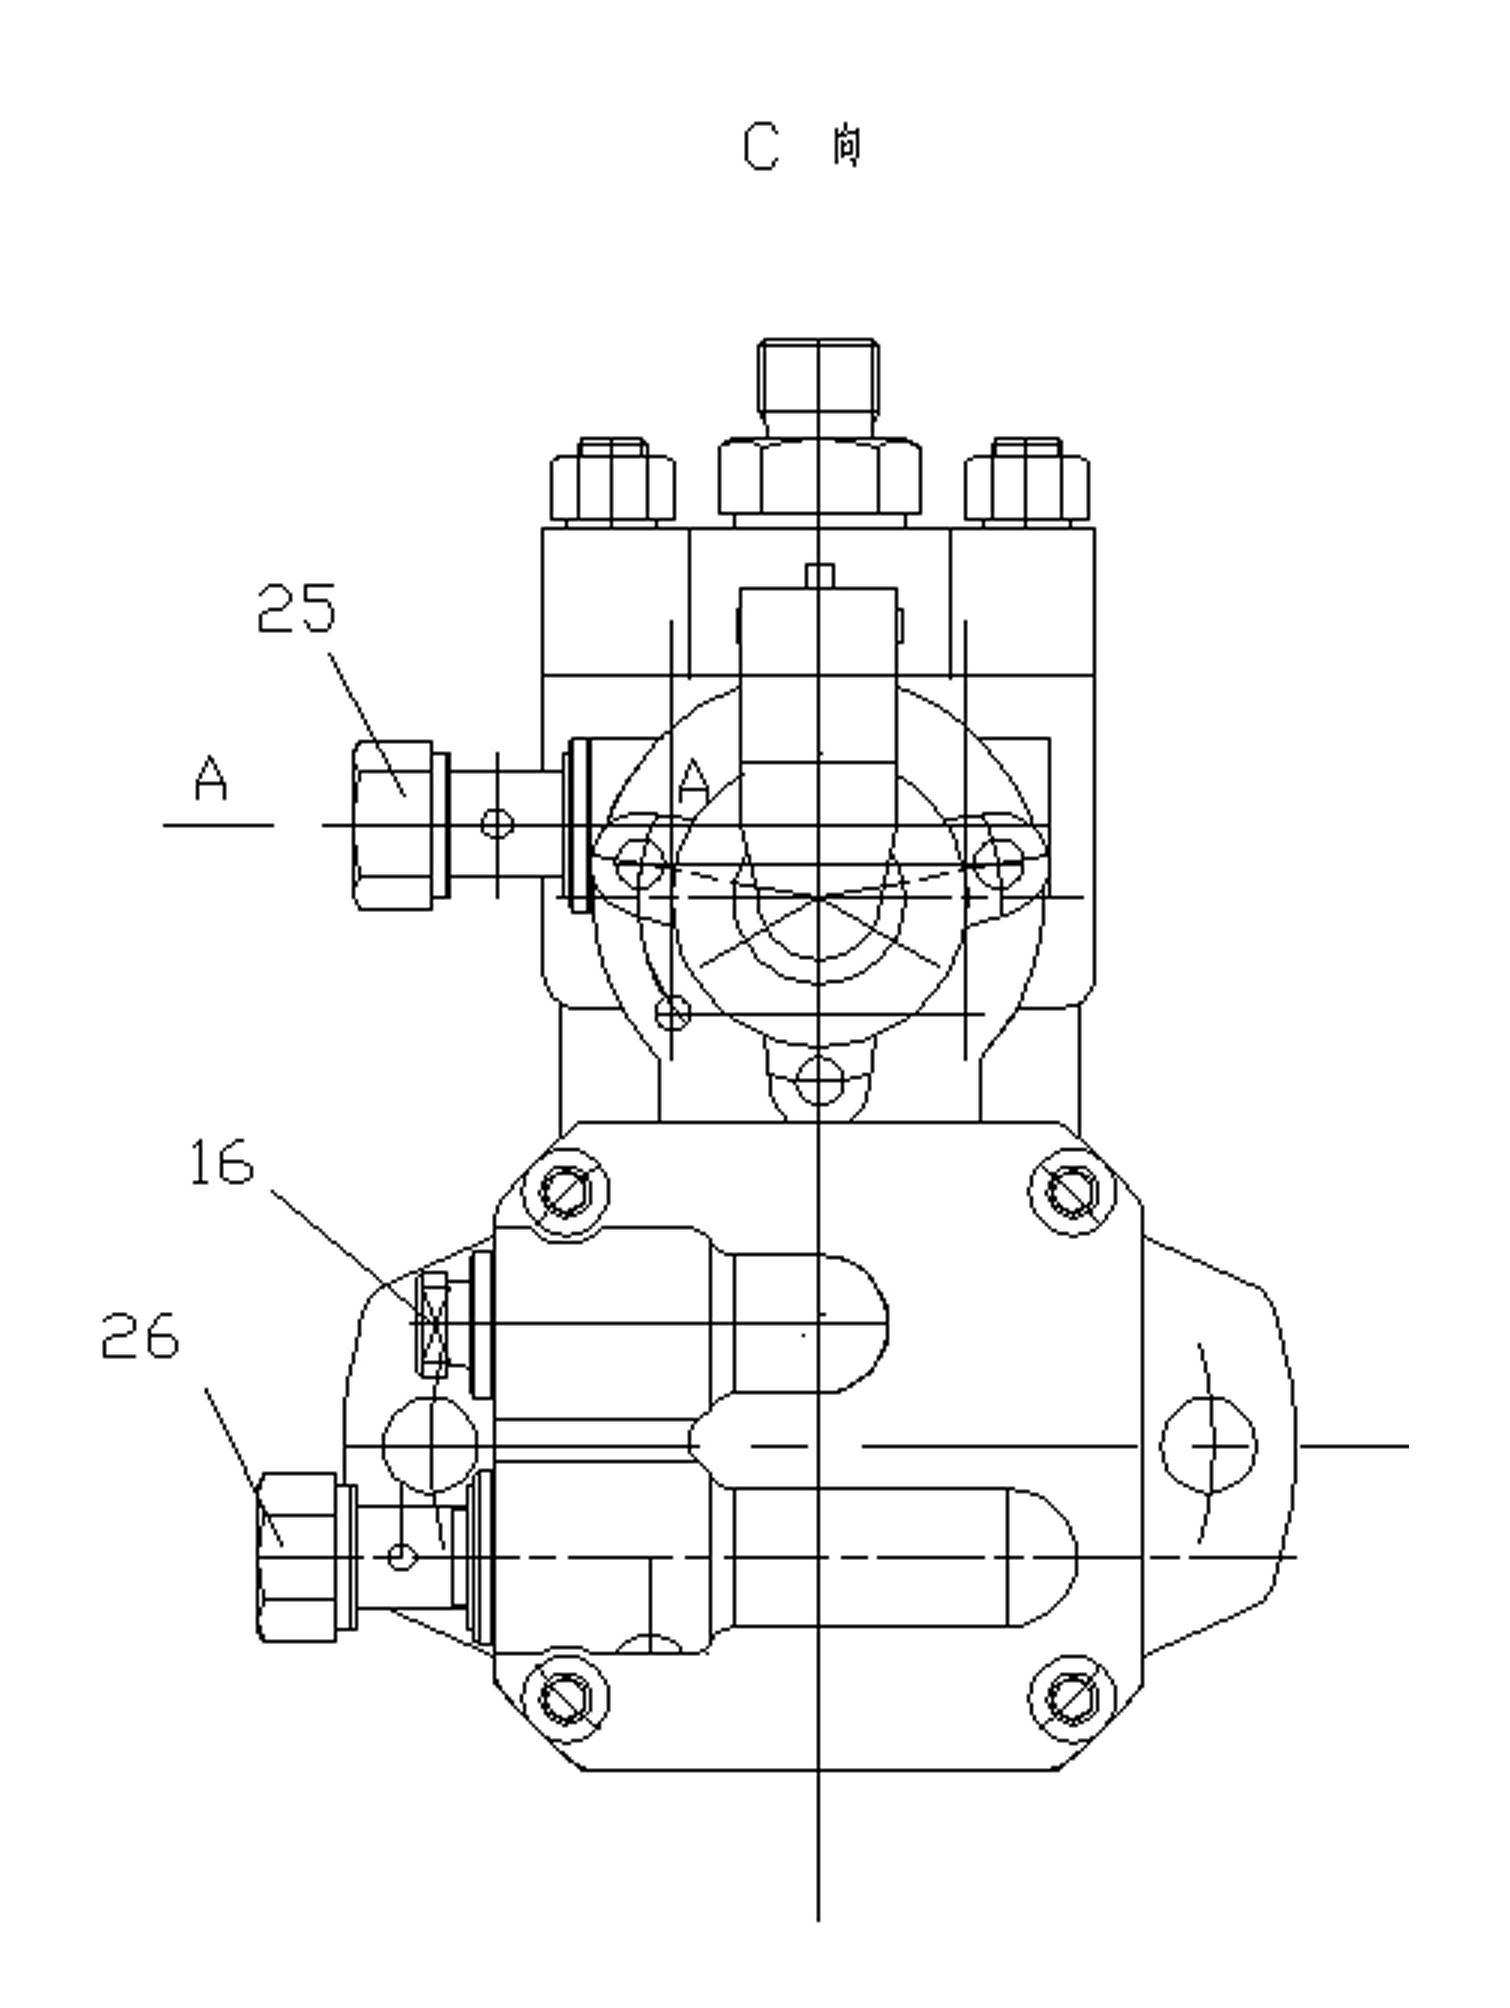 In-line type fuel feed pump of high-pressure common rail system